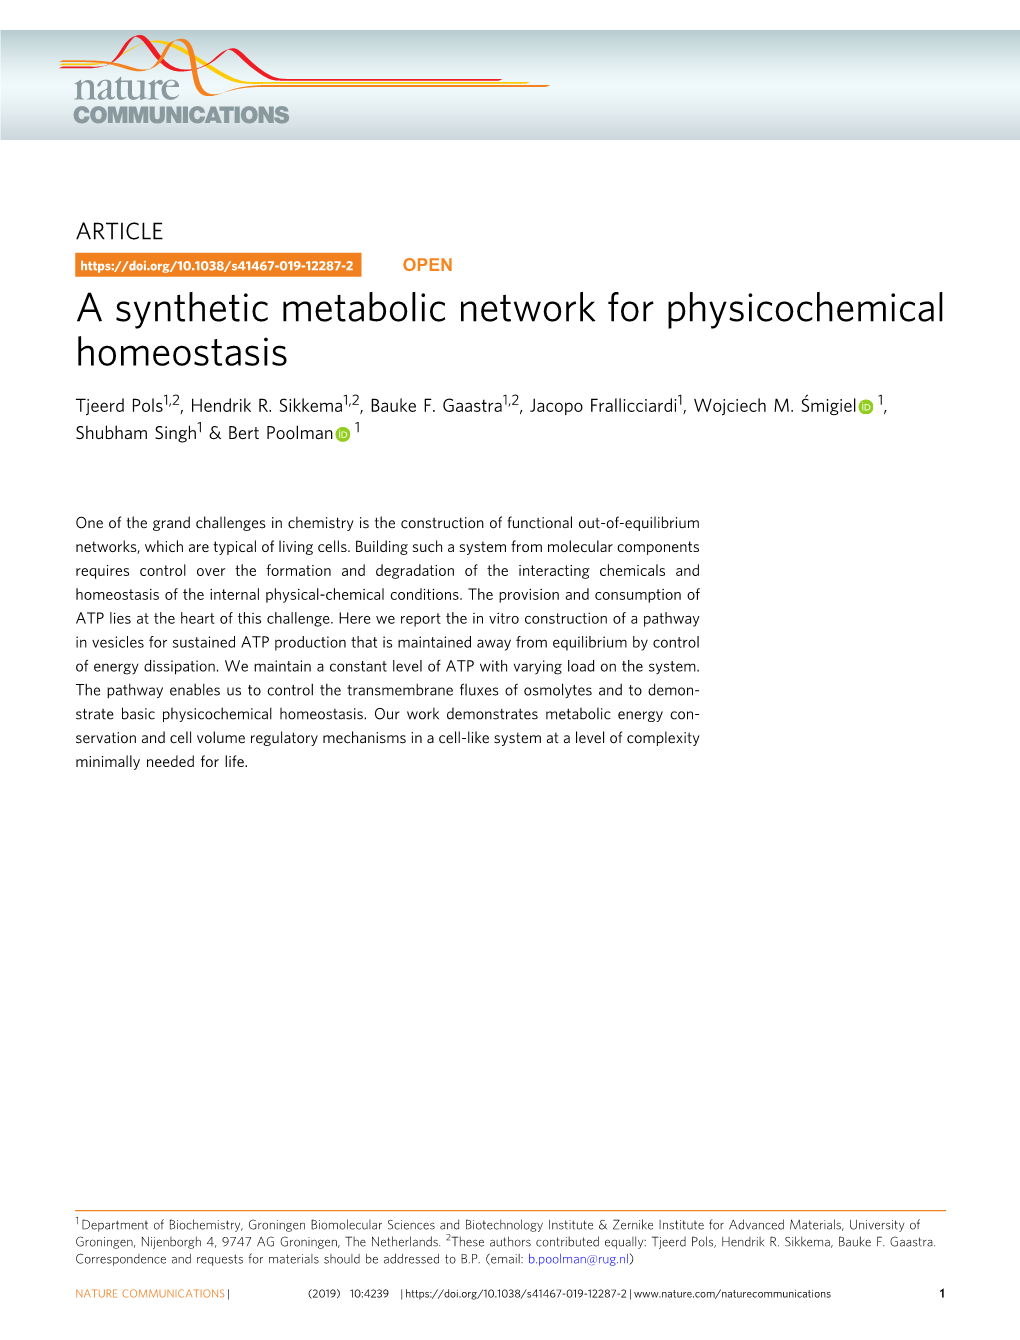 A Synthetic Metabolic Network for Physicochemical Homeostasis